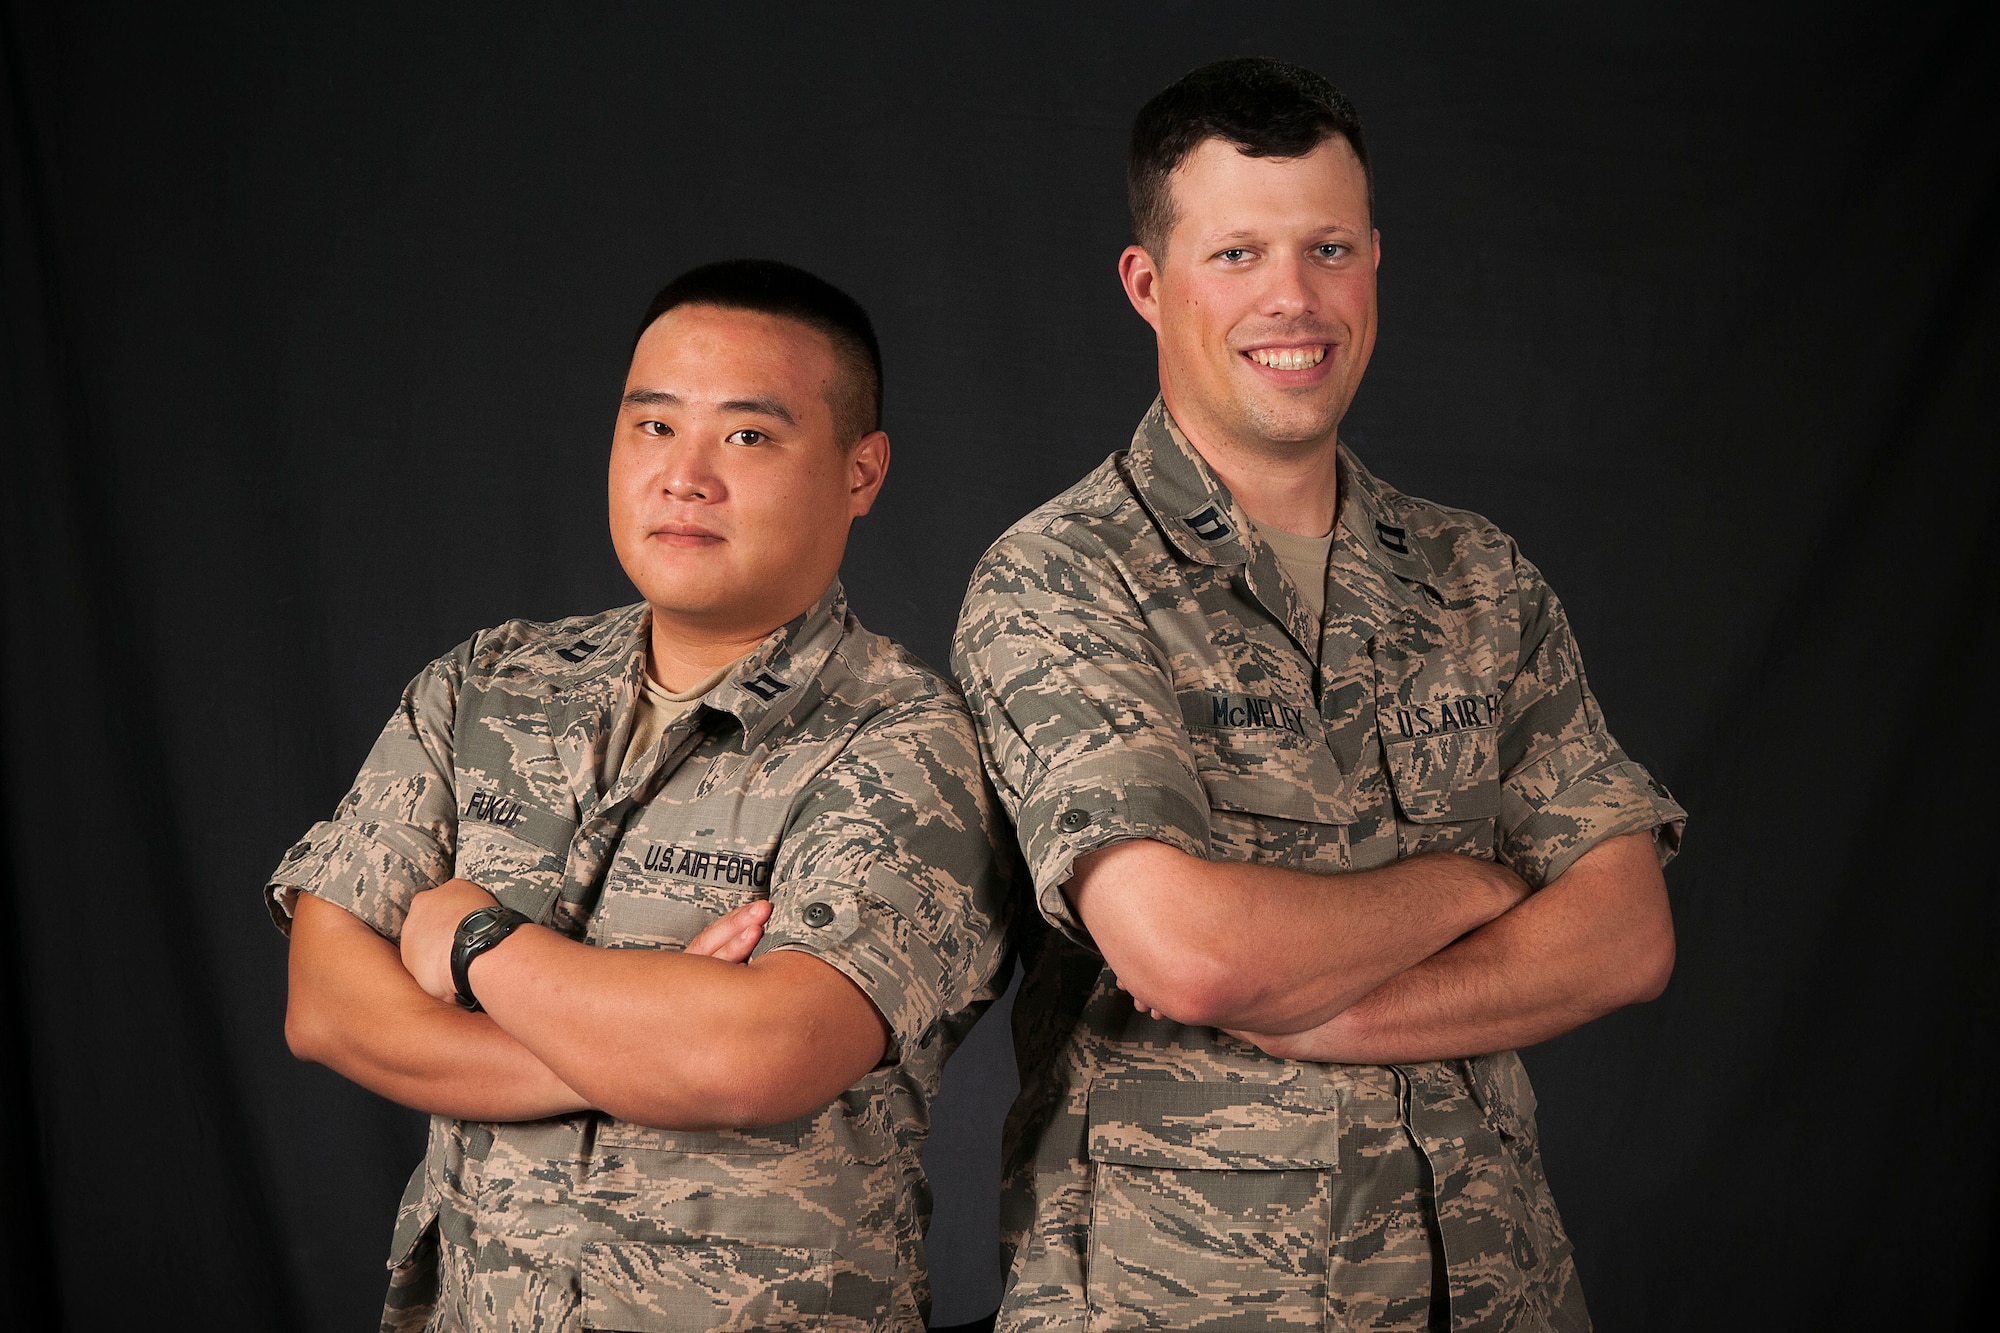 Capts. Christopher Fukui and Joshua McNelley are assigned to the 18th Logistics Readiness Squadron at Kadena Air Base, Japan. Both Airmen are descendants of sailors who fought in the Battle of Midway during World War II. Fukui’s great-grandfather, Chisato Morita, commanded the Imperial Japanese Navy Midway Flying Corps aboard the aircraft carrier Akagi and McNelley’s grandfather, Ray Sorton, a U.S. Navy Sailor, manned an anti-aircraft gun during the battle. (U.S. Air Force photo/Senior Airman John Linzmeier)